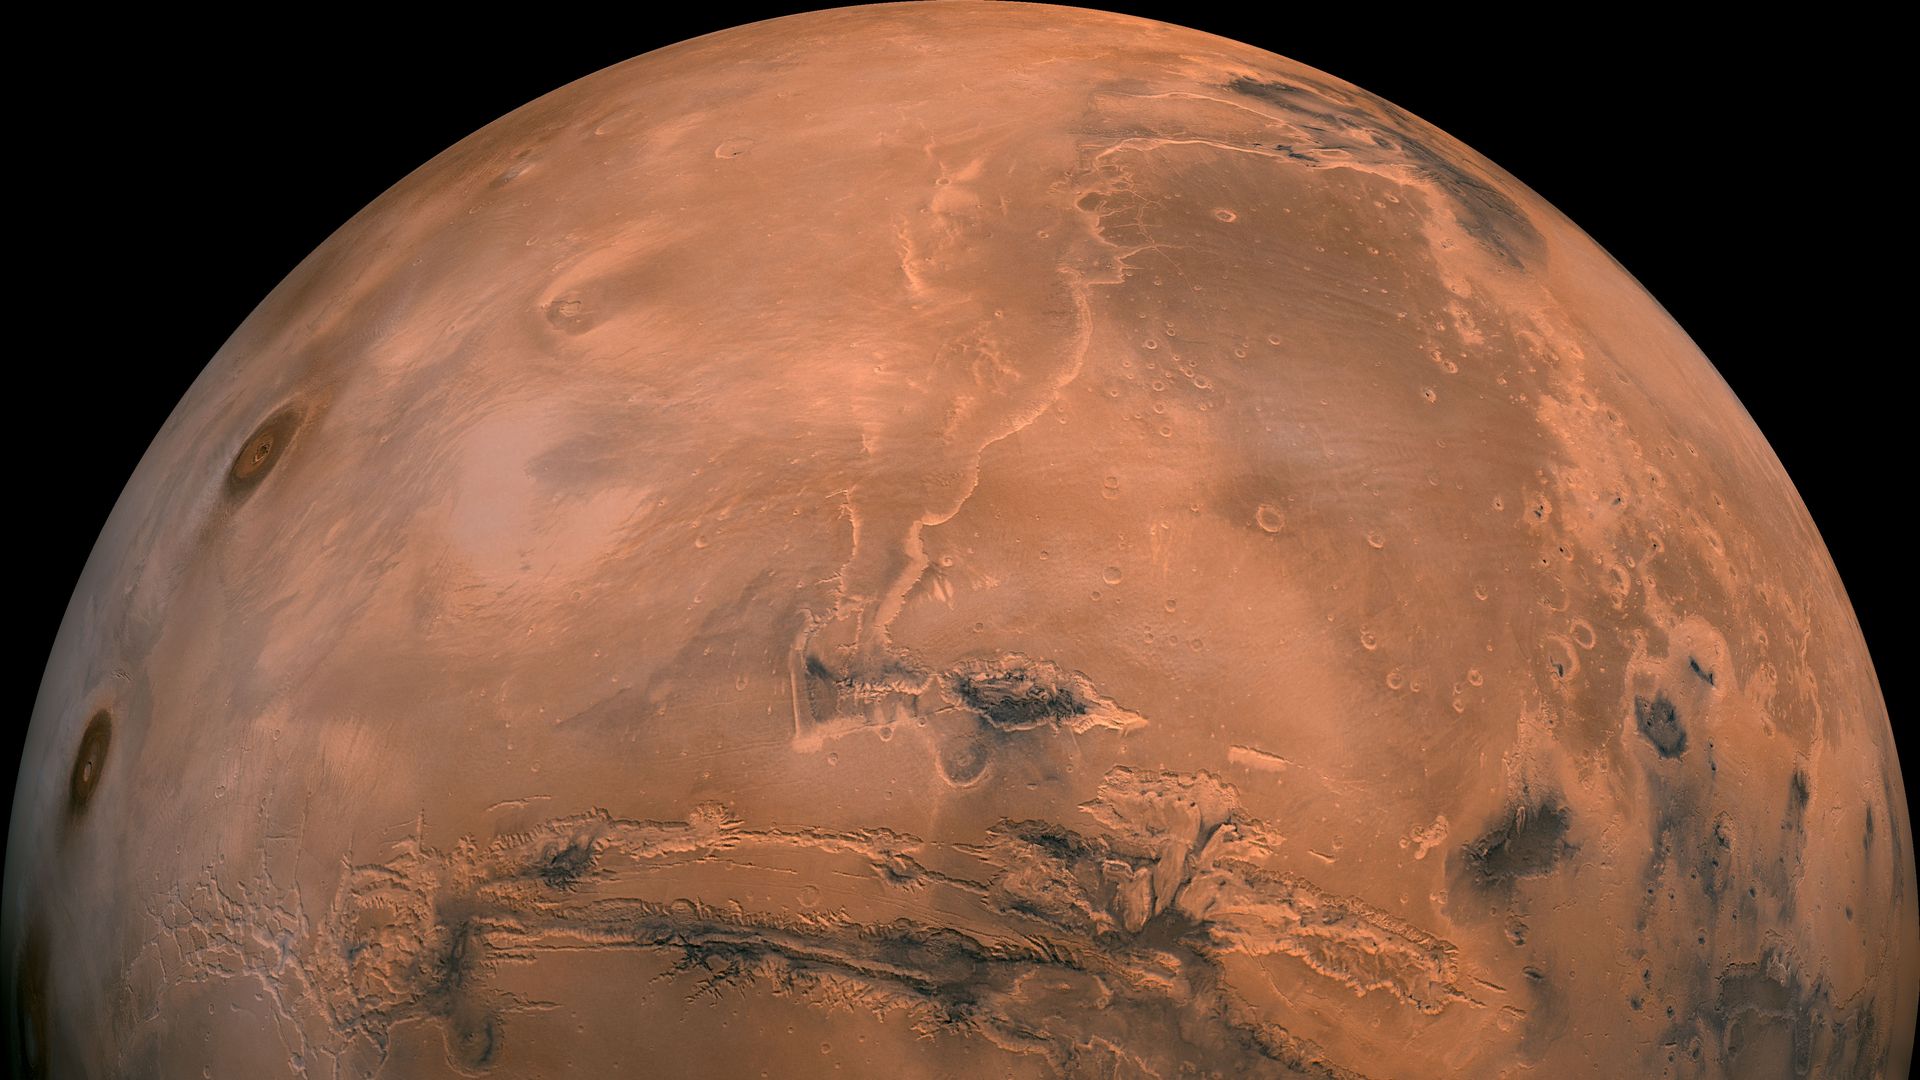 Mosaic of the Valles Marineris hemisphere of Mars projected into point perspective, a view similar to that which one would see from a spacecraft. 